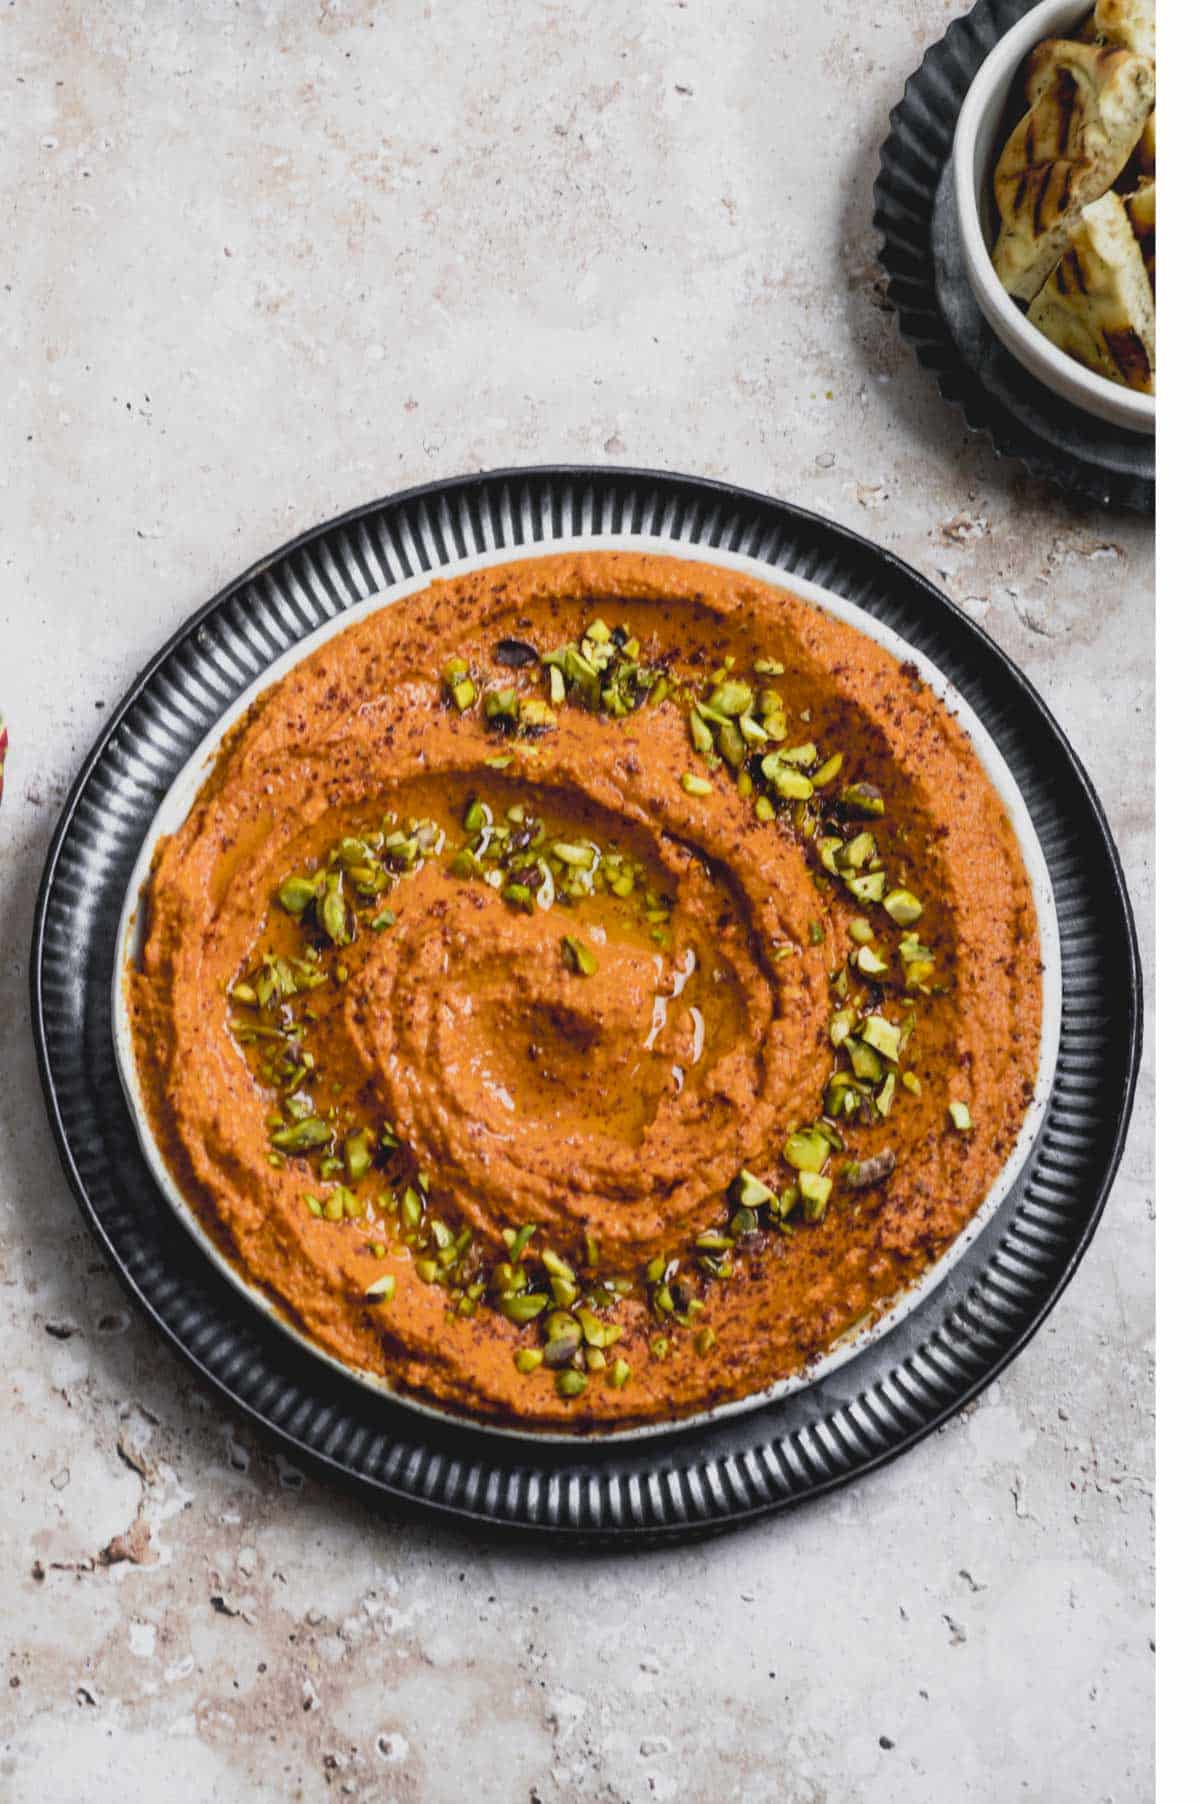 Roasted red pepper hummus on a plate garnishes with pistachios
